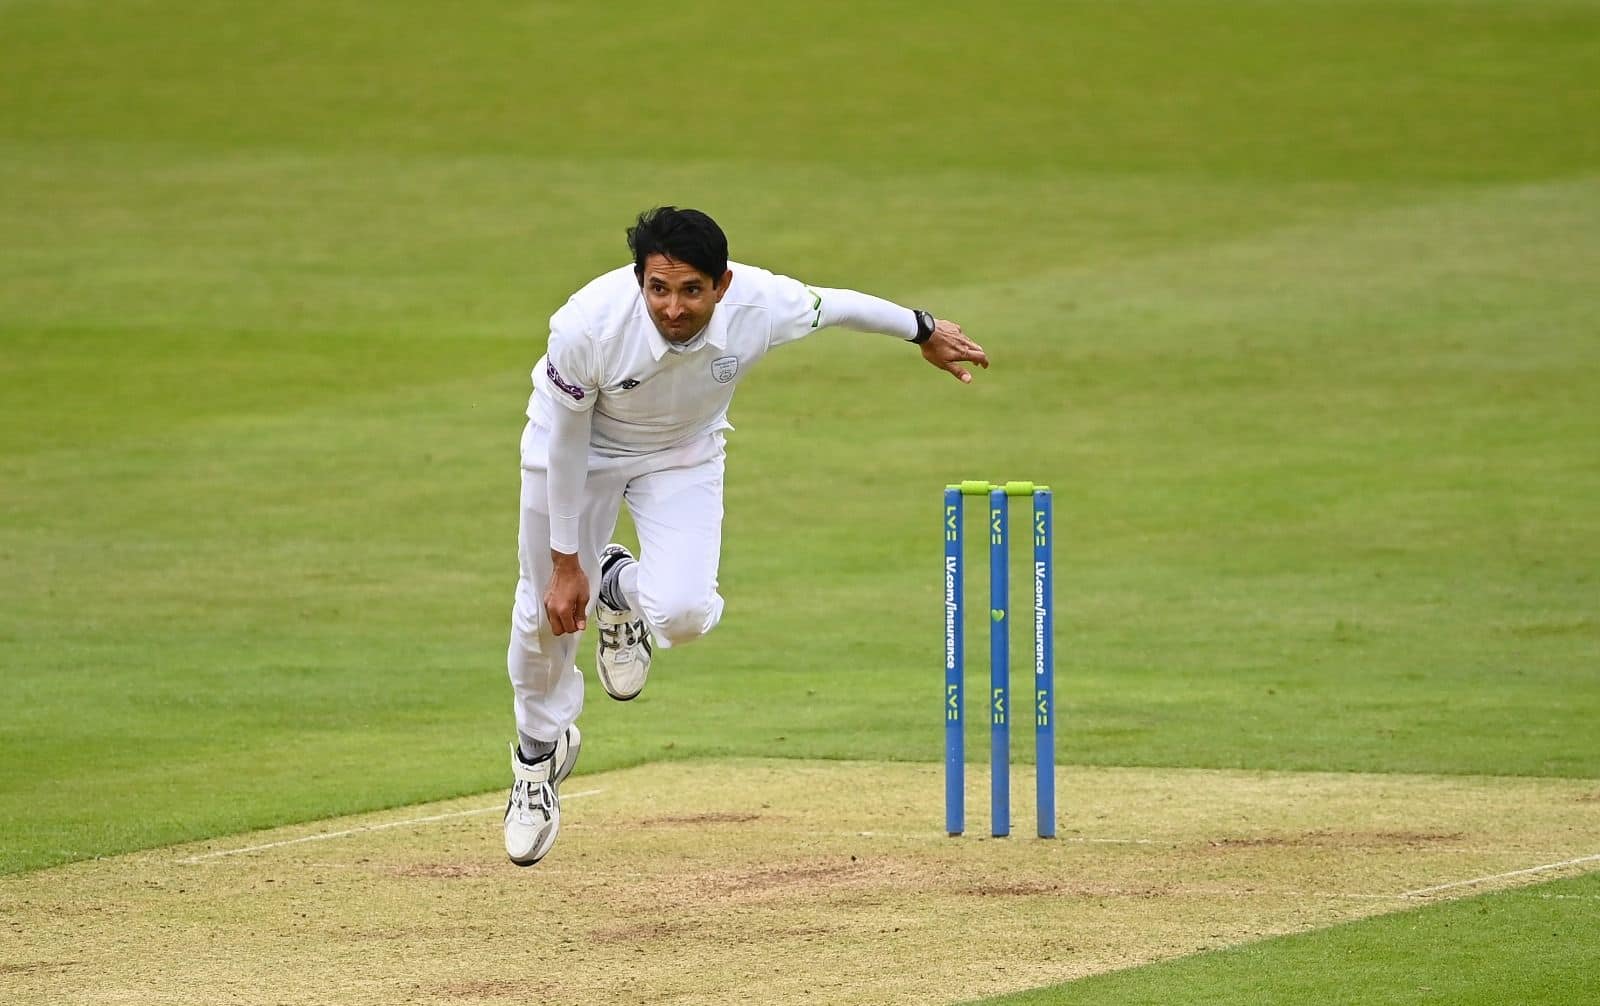 Pakistan speedster signs two-year deal with Hampshire